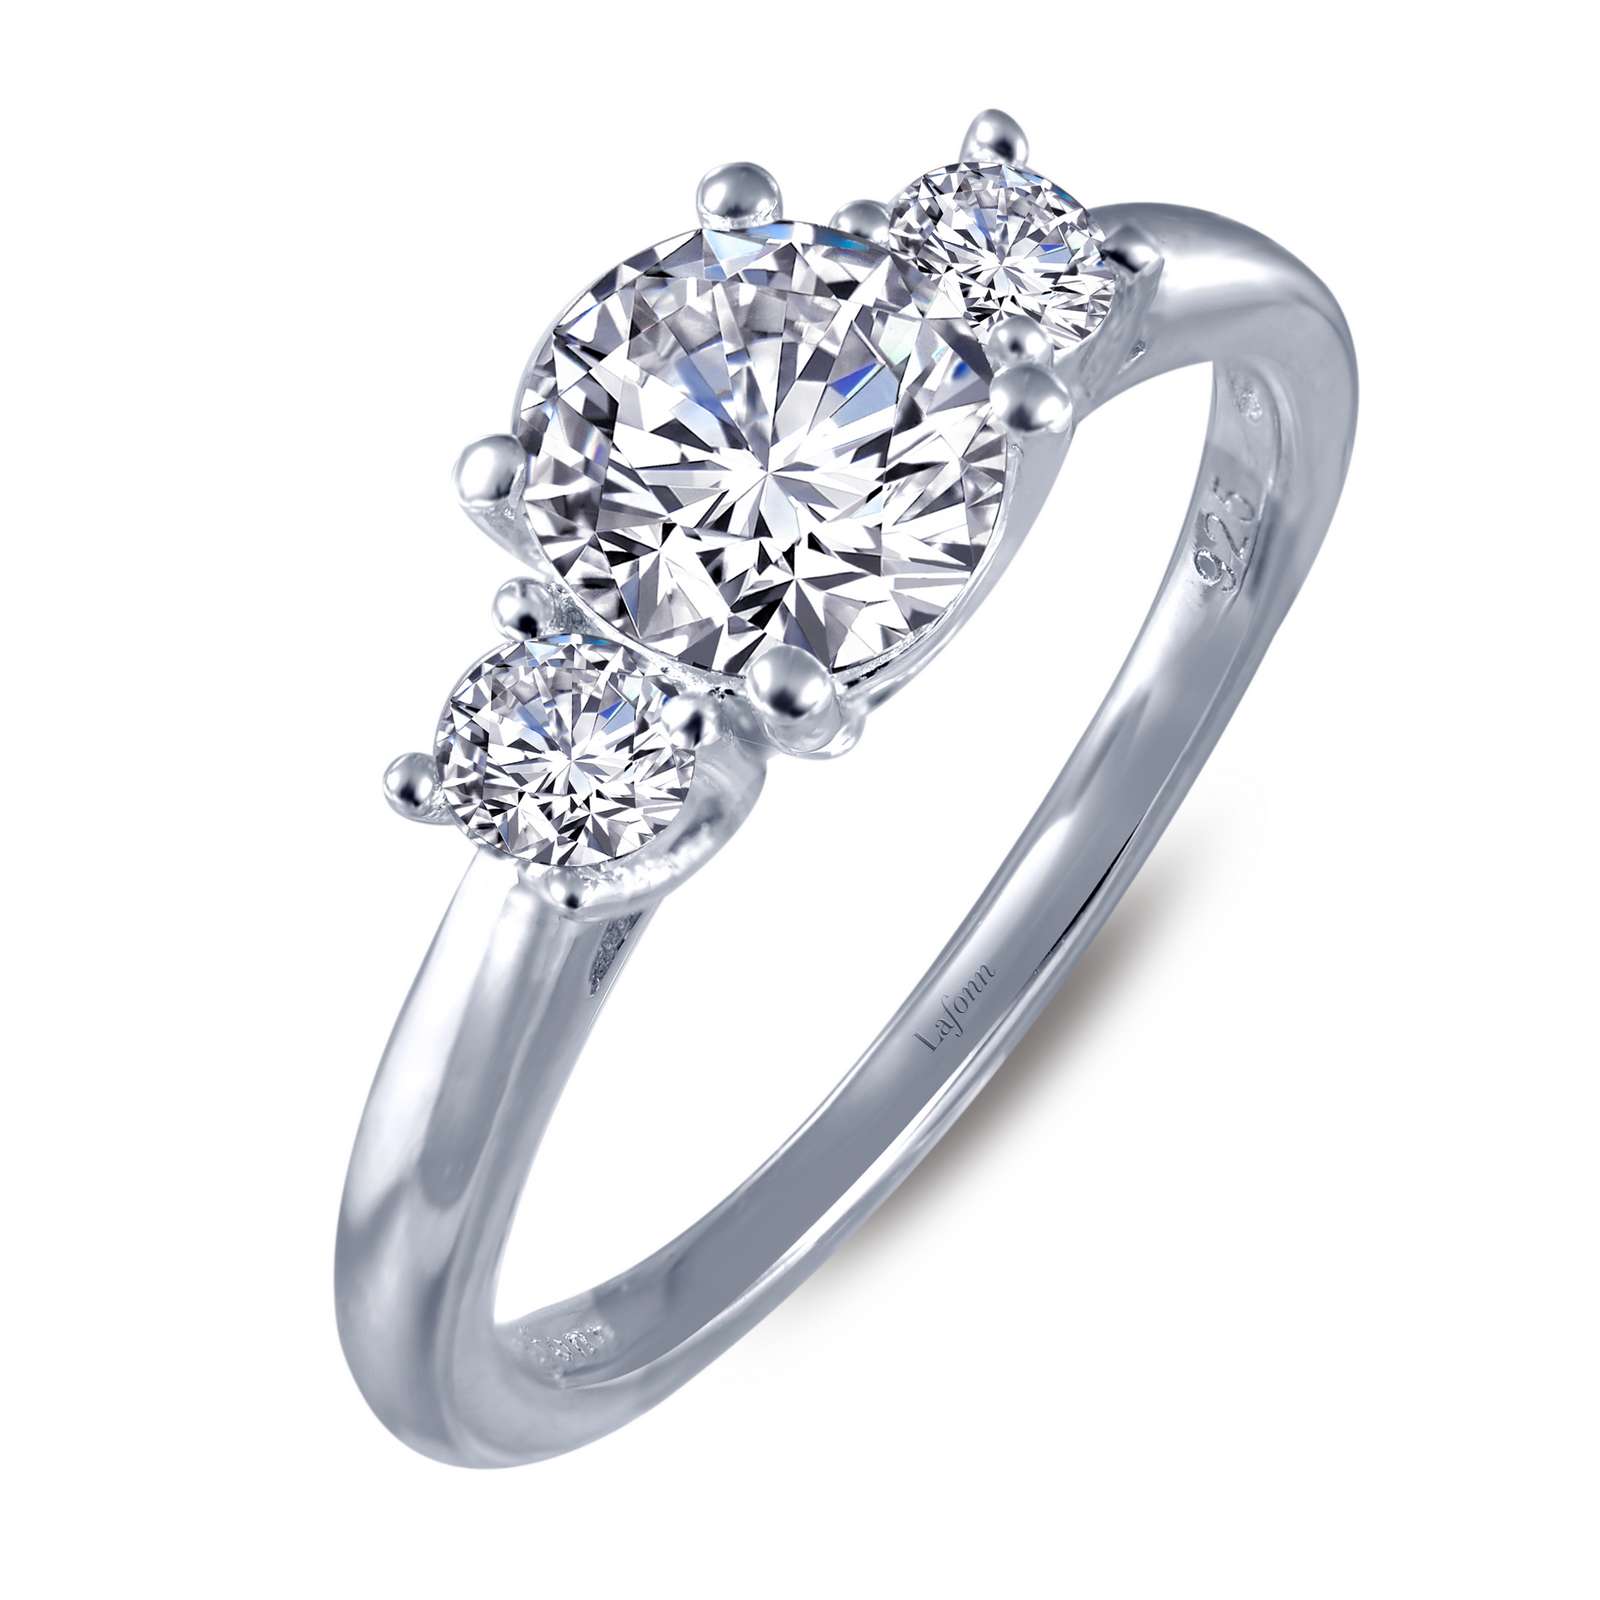 Three-Stone Engagement Ring Griner Jewelry Co. Moultrie, GA